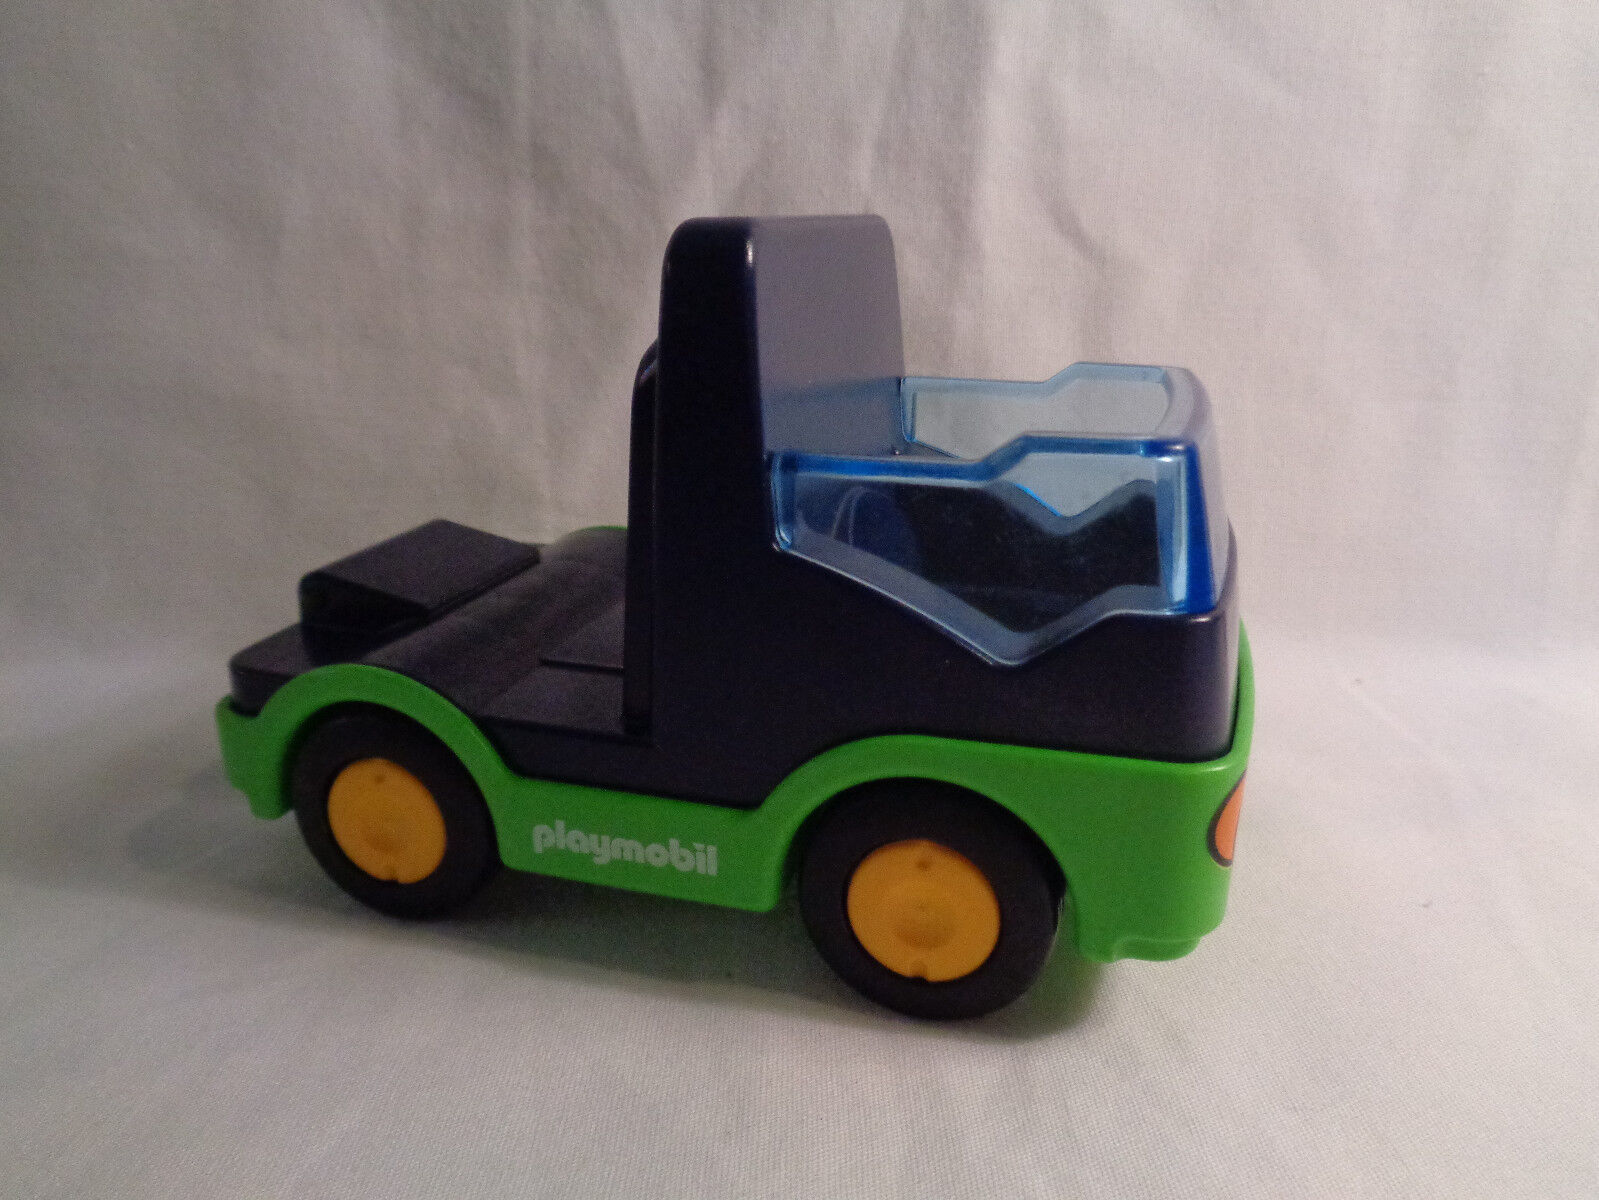 2007 Playmobil Geobra Replacement Truck Cab Blue / Green - As Is - $6.87